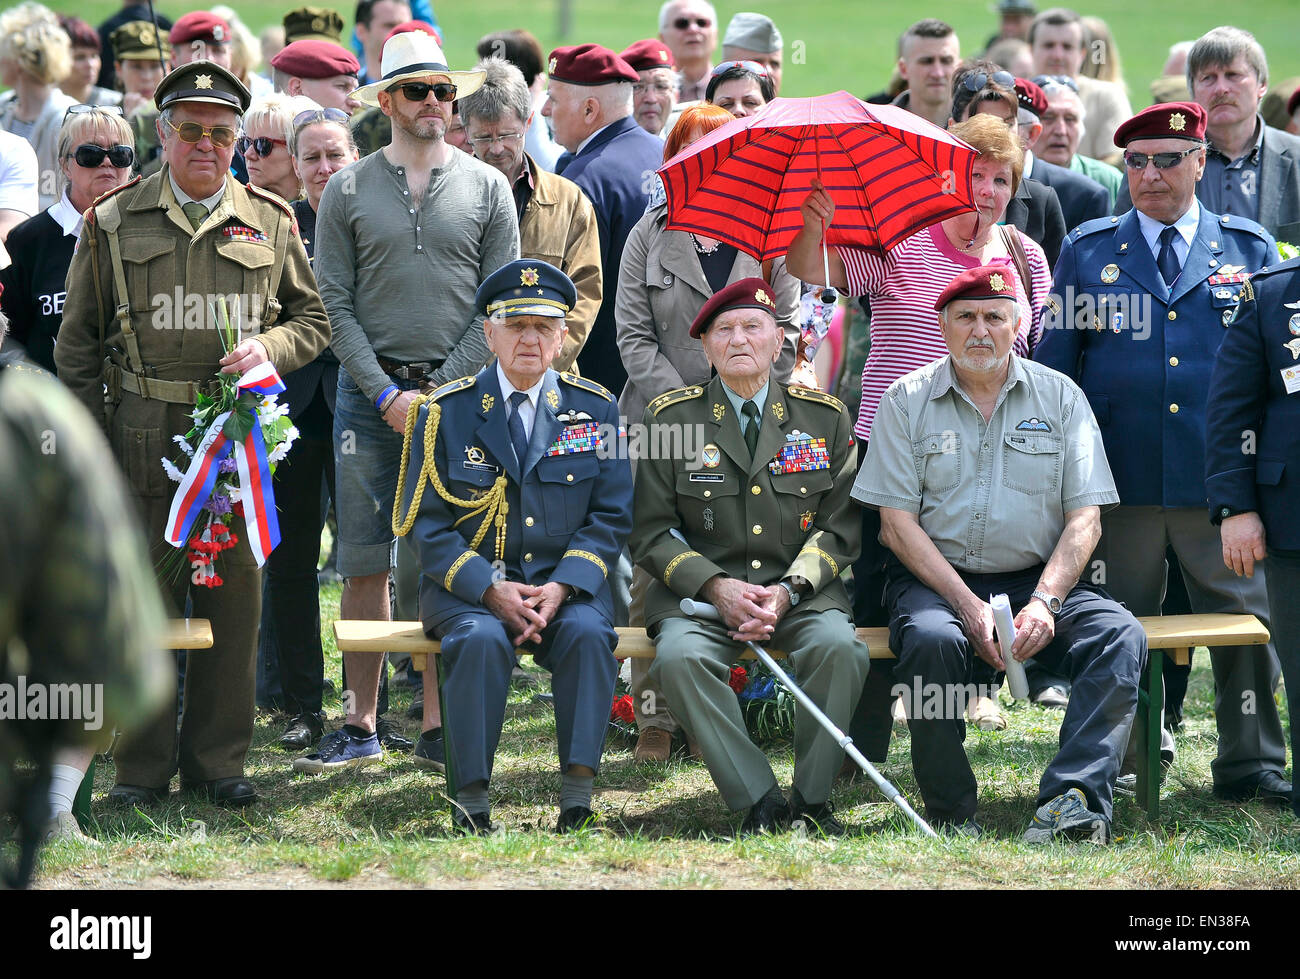 Orechov, Czech Republic. 25th Apr, 2015. About thousand people meet to commemorate wartime pilot Adolf Opalka on the occasion of his 100th birth anniversary and 73th anniversary of his parachute group Out Distance's operation participating in attack on Deputy Reichsprotektor Reinhard Heydrich and at the same time 70th anniversary of end of World War II, at the memorial in Orechov, Czech Republic, April 25, 2015. In the picture sits Emil Bocek (left) one of the last living pilots of British Royal Air Force (RAF) and Jaroslav Klemes (center) the last living parachutist landed in protectorate. (C Stock Photo